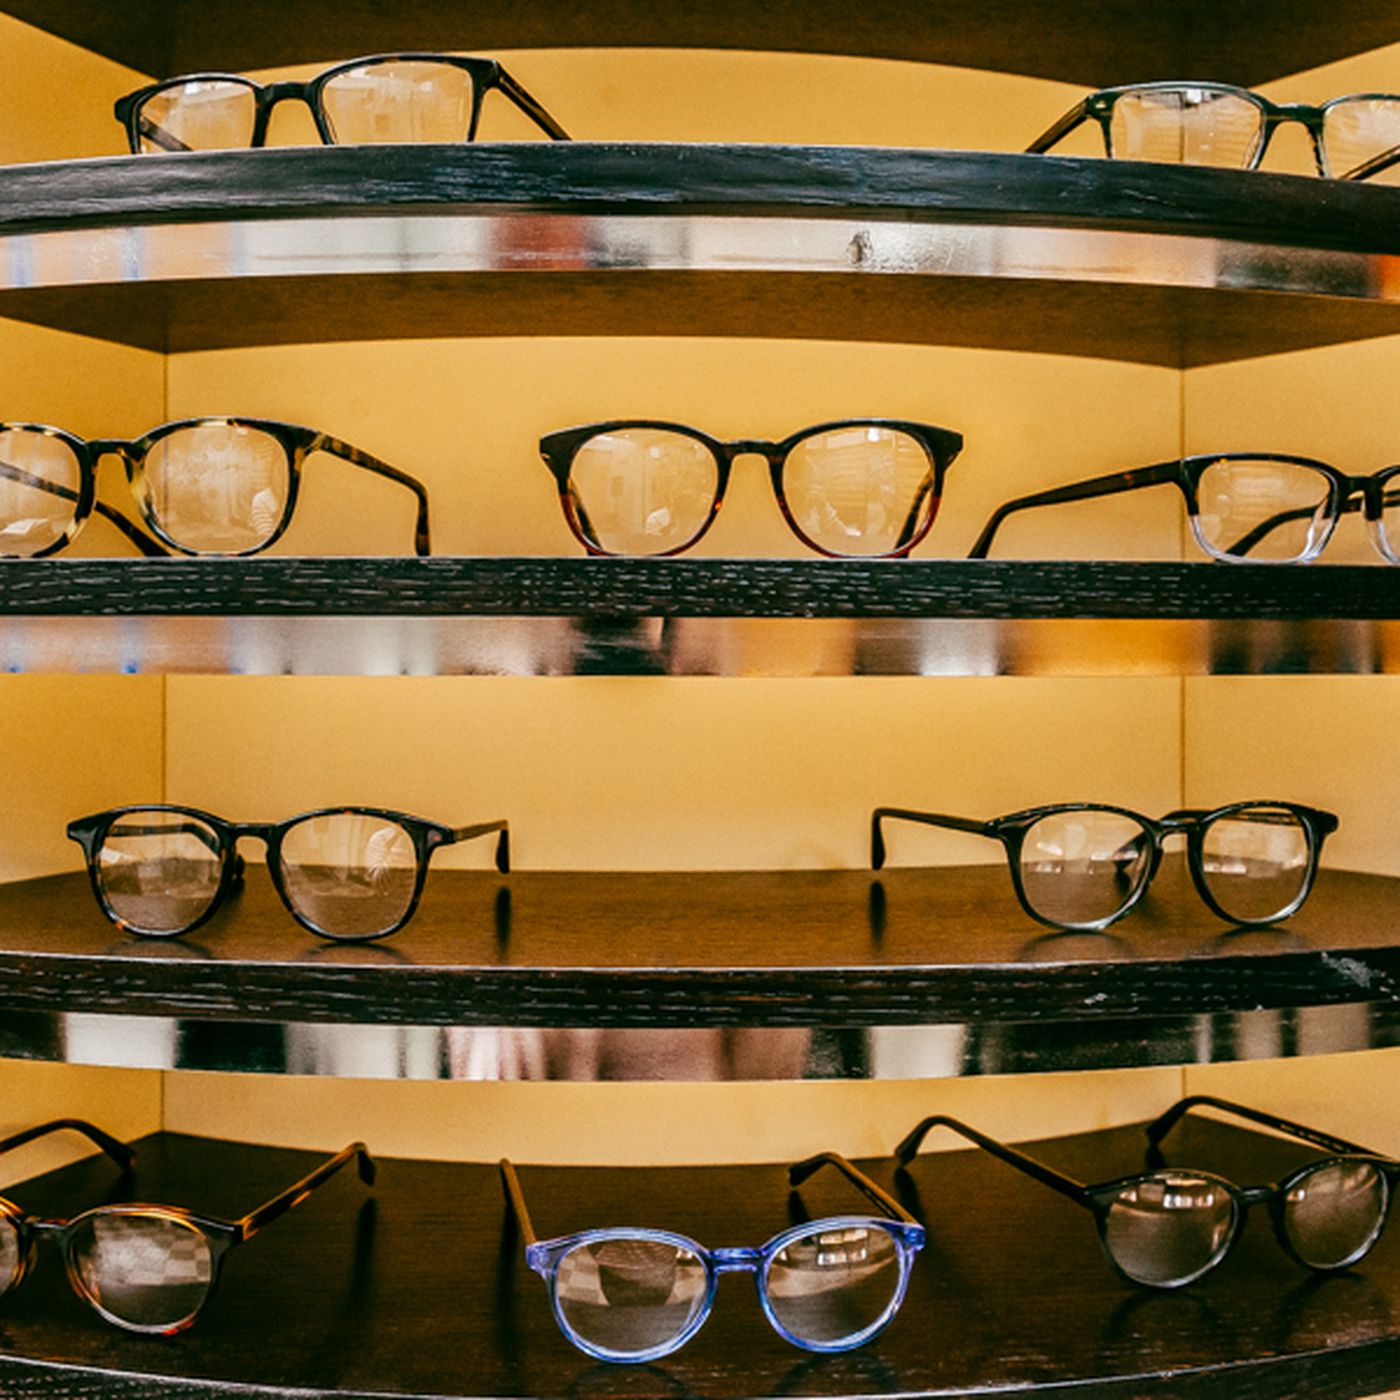 Hey, Four-Eyes! Where to Buy Glasses in NYC